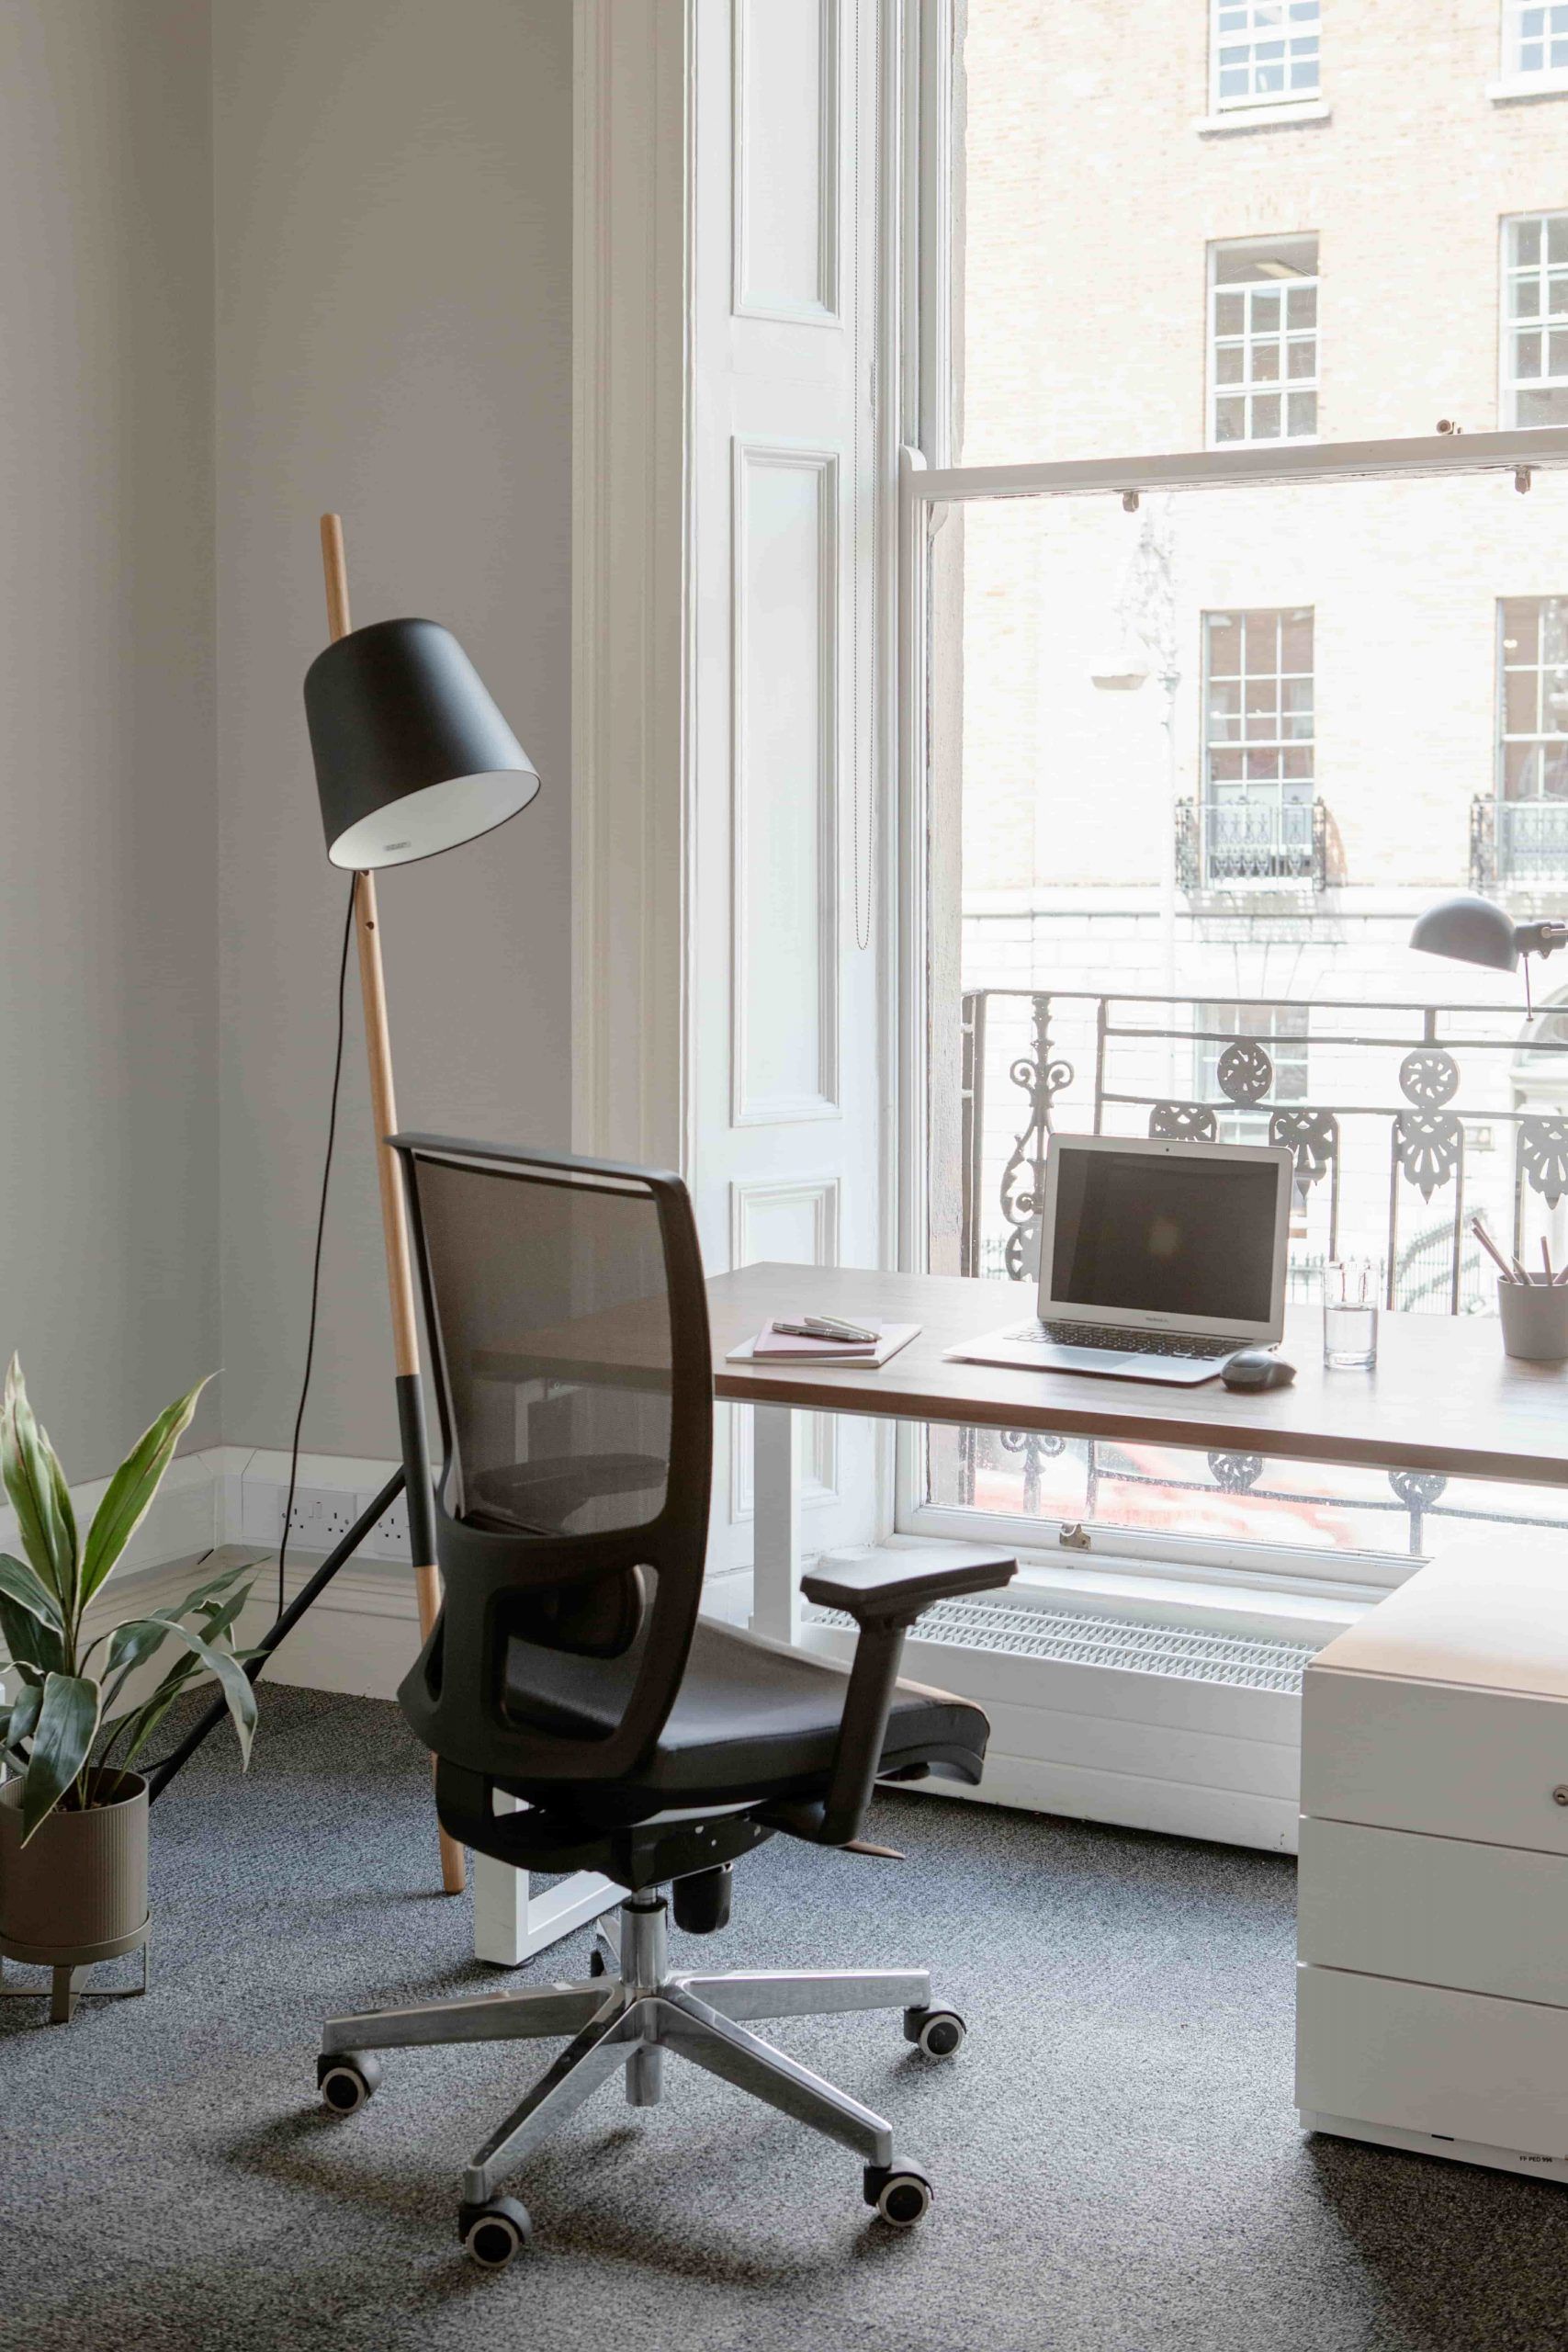 16 Fitzwilliam Place, Dublin 2 - flexible office space to rent Dublin - private office